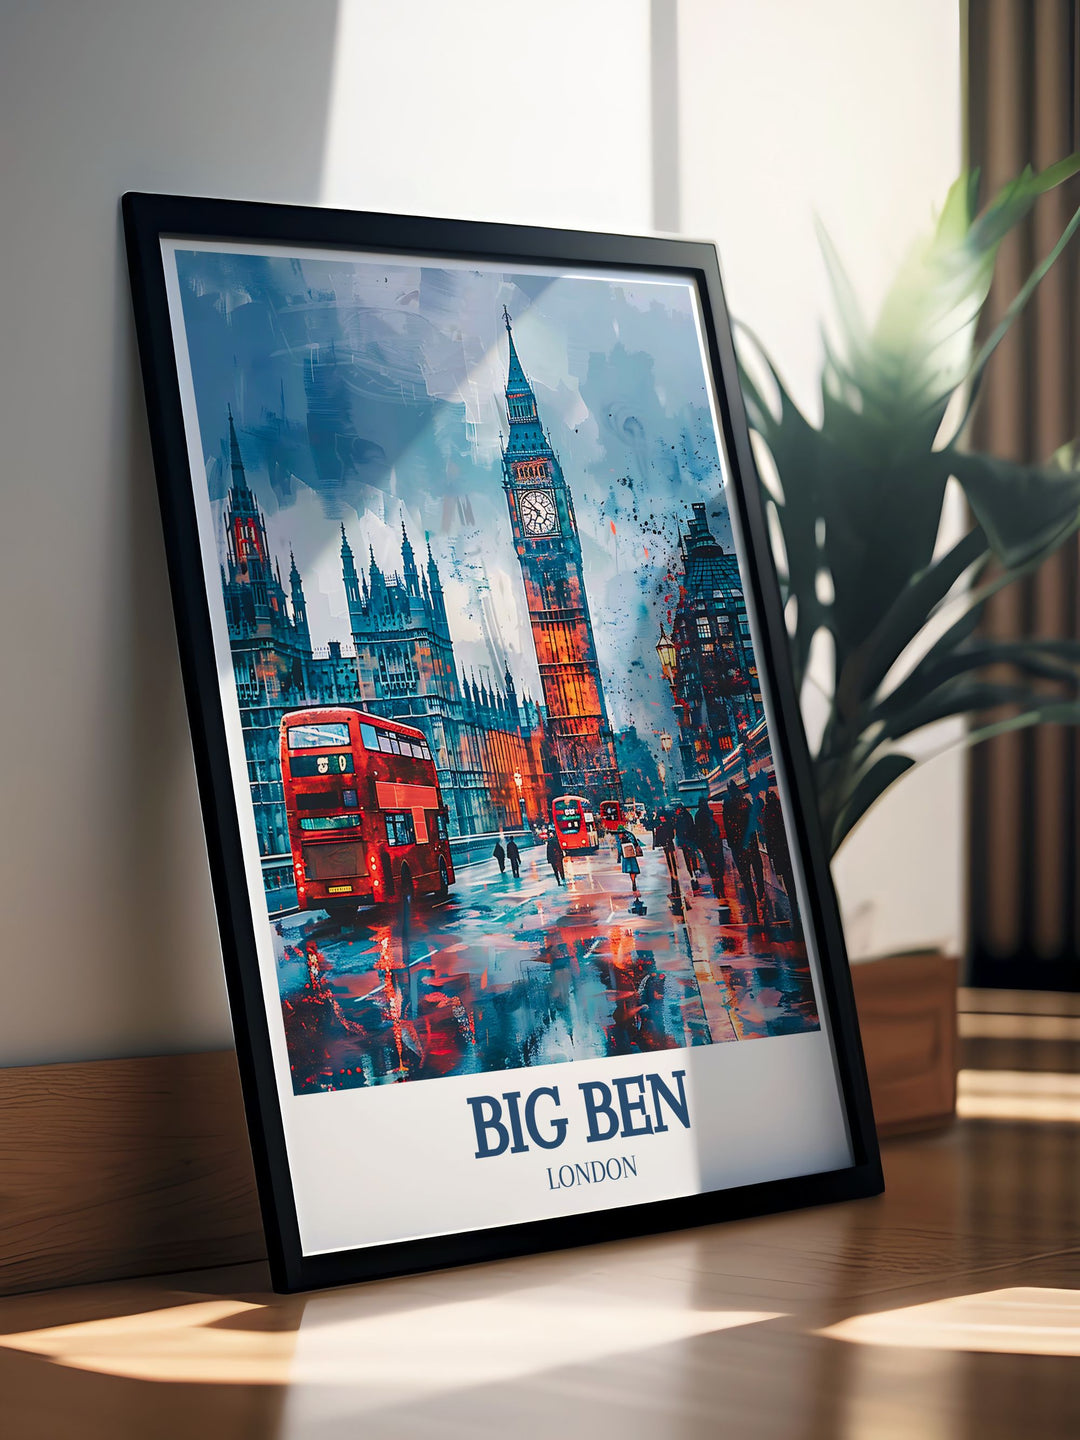 Detailed digital download of Londons Big Ben, Westminster Bridge, and the River Thames, ideal for any art collection or as a memorable travel keepsake. Enhances your home with Londons historic charm.